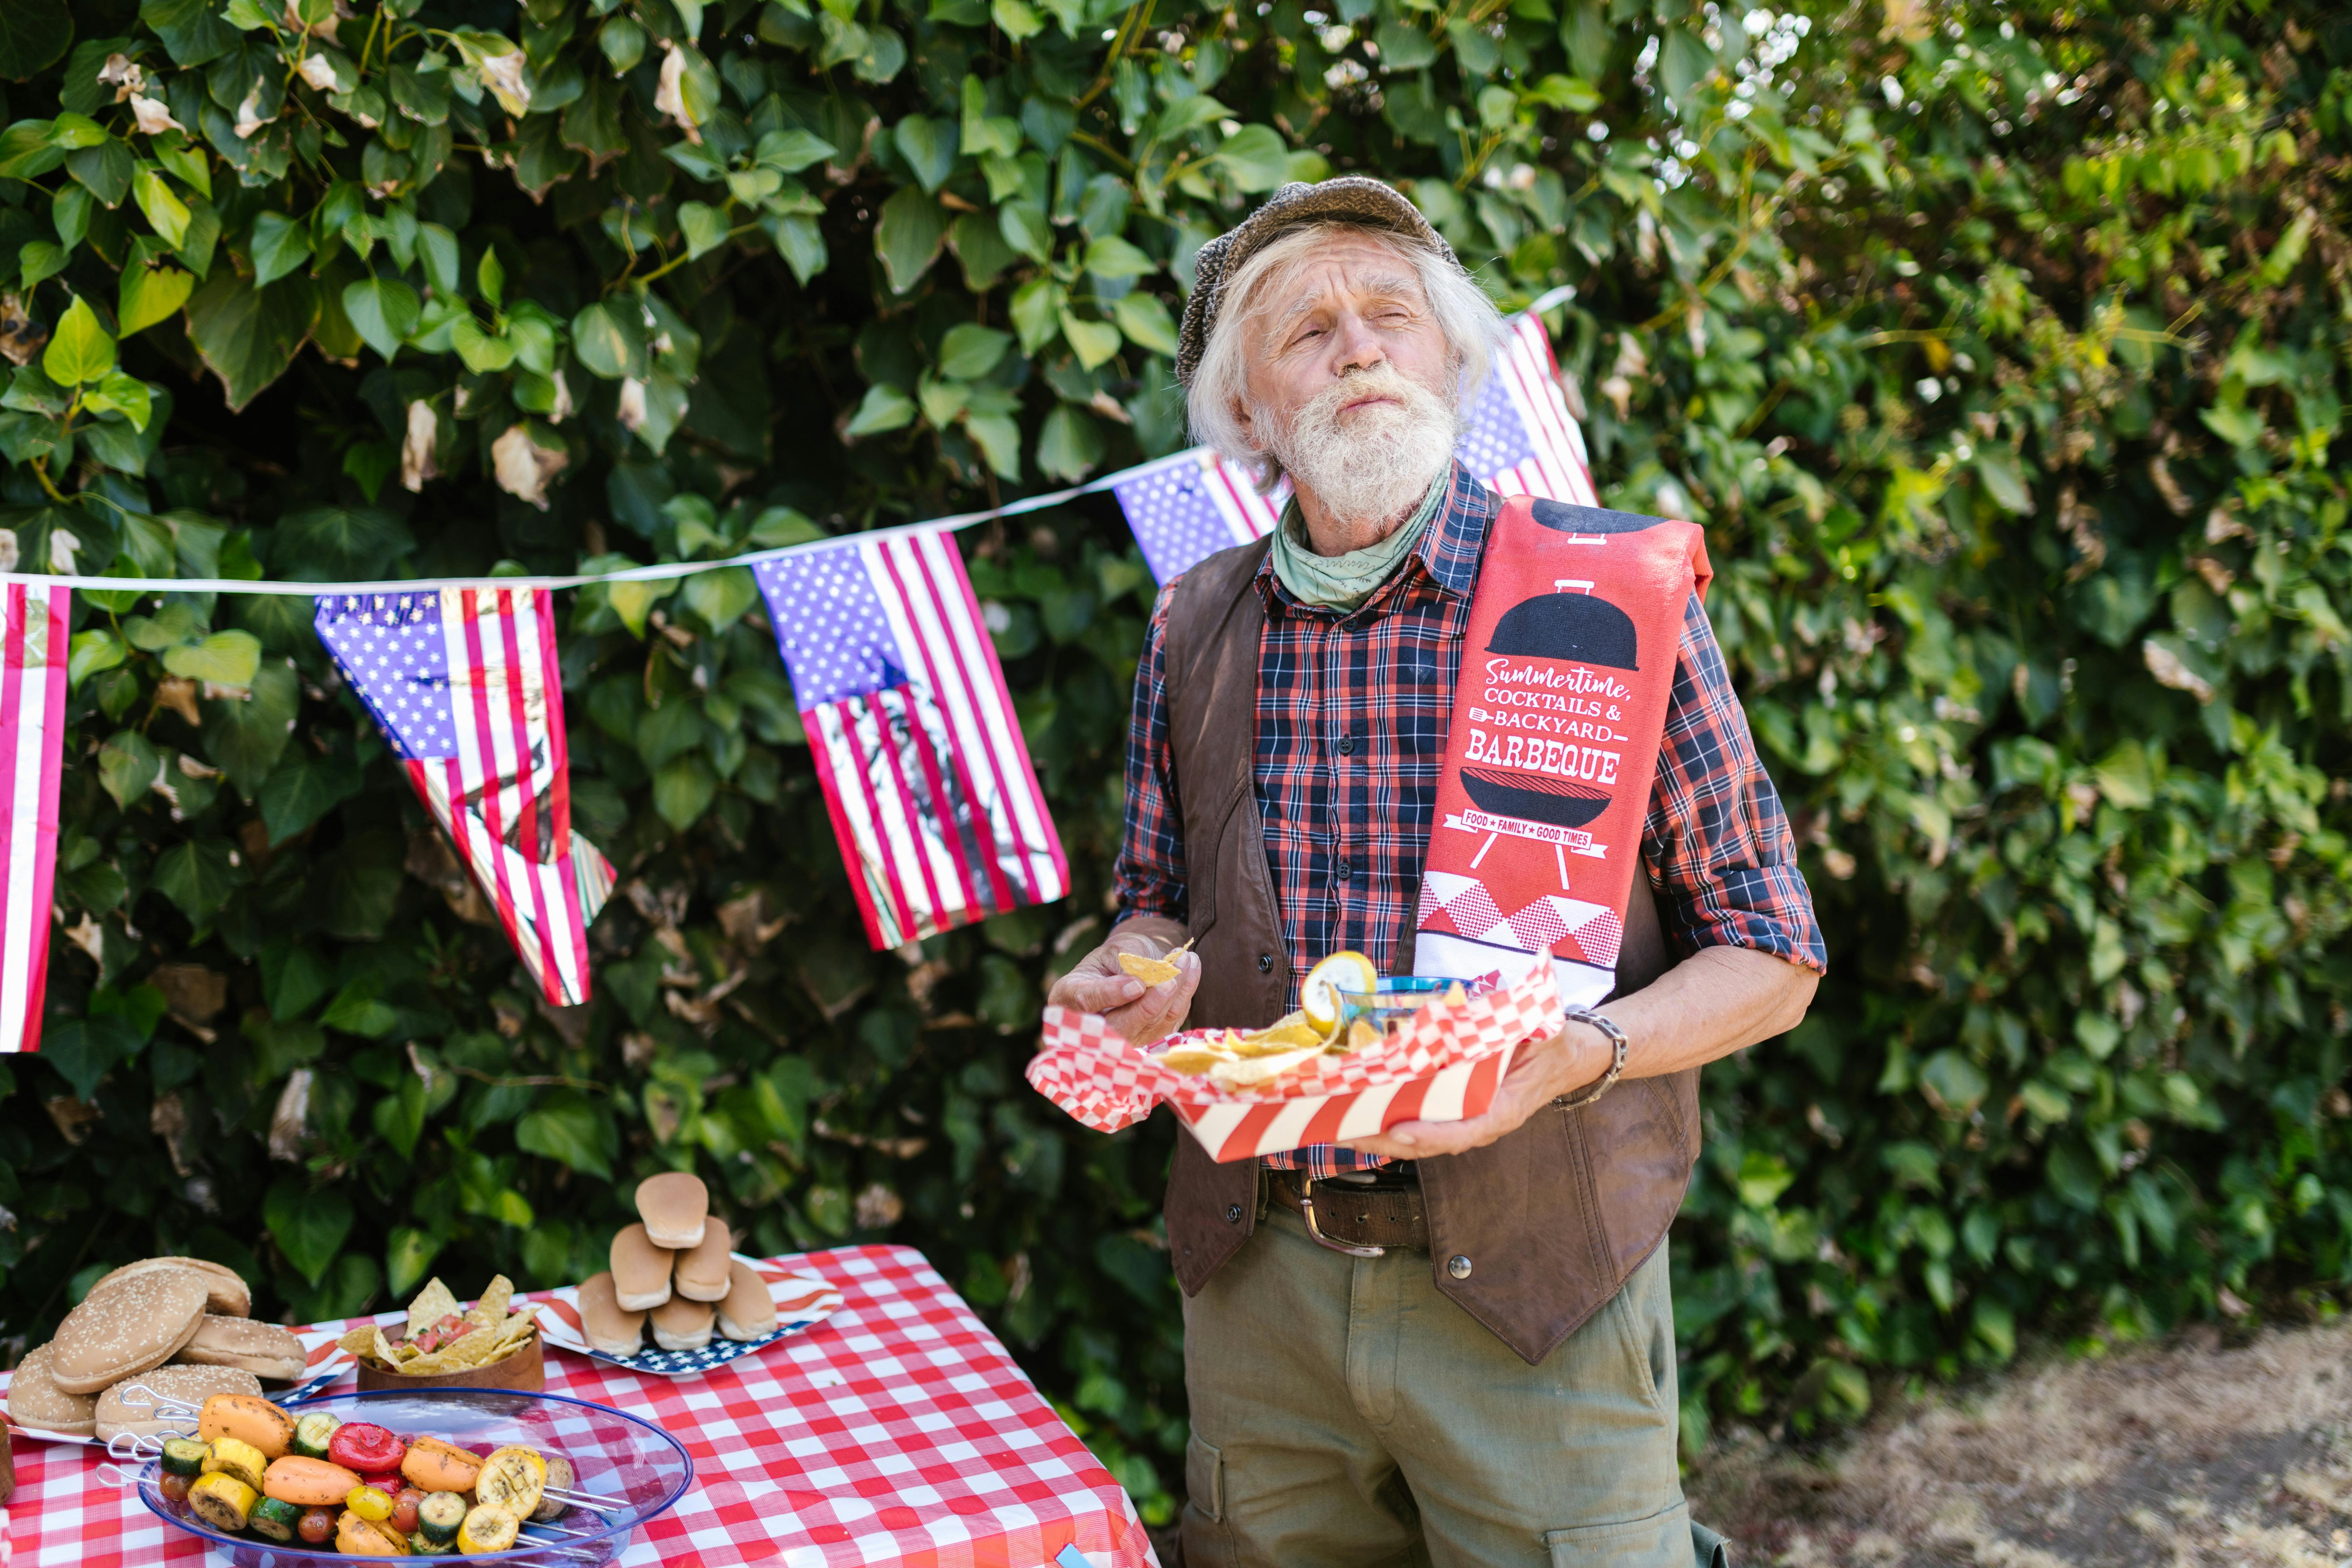 elderly man holding a tray with food and standing in the garden decorated for the